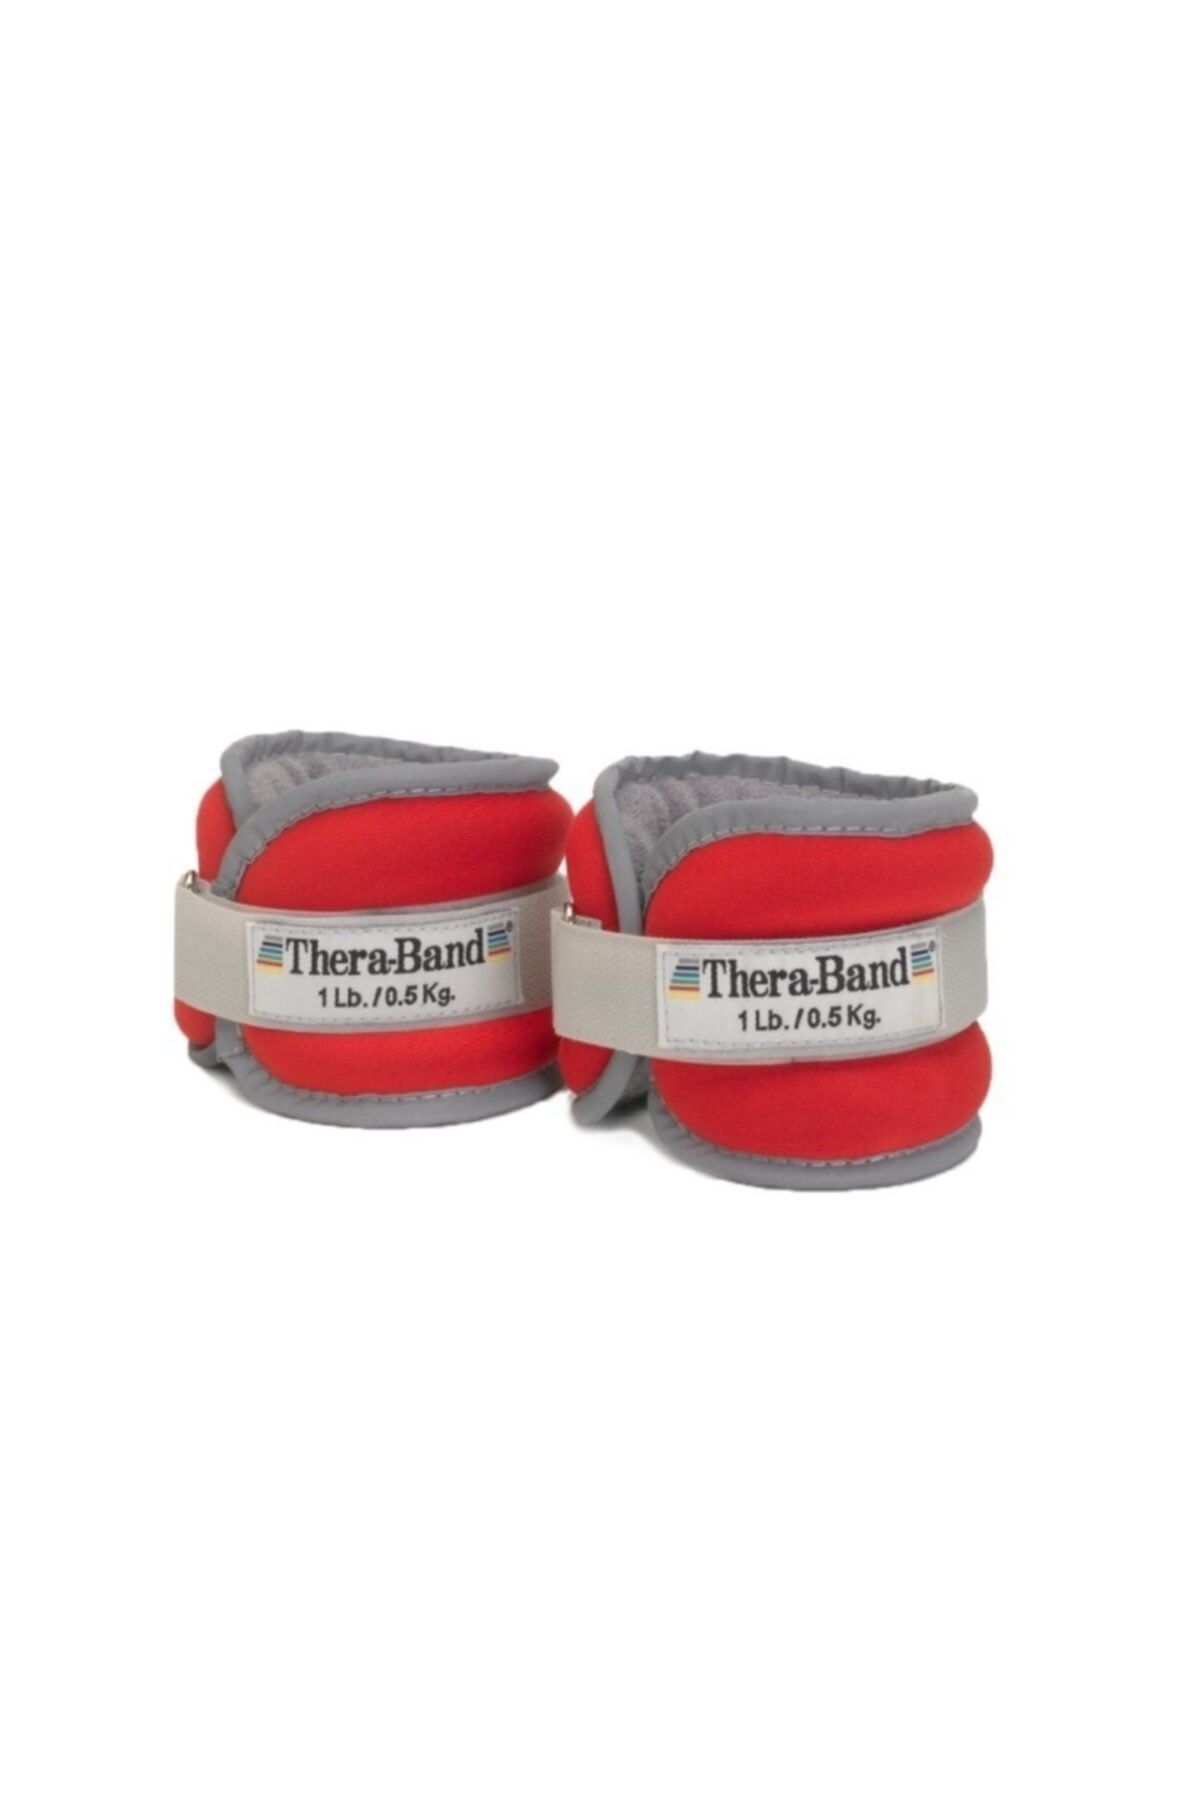 Theraband Comfort Ankle Weıghts Red 2 Lb